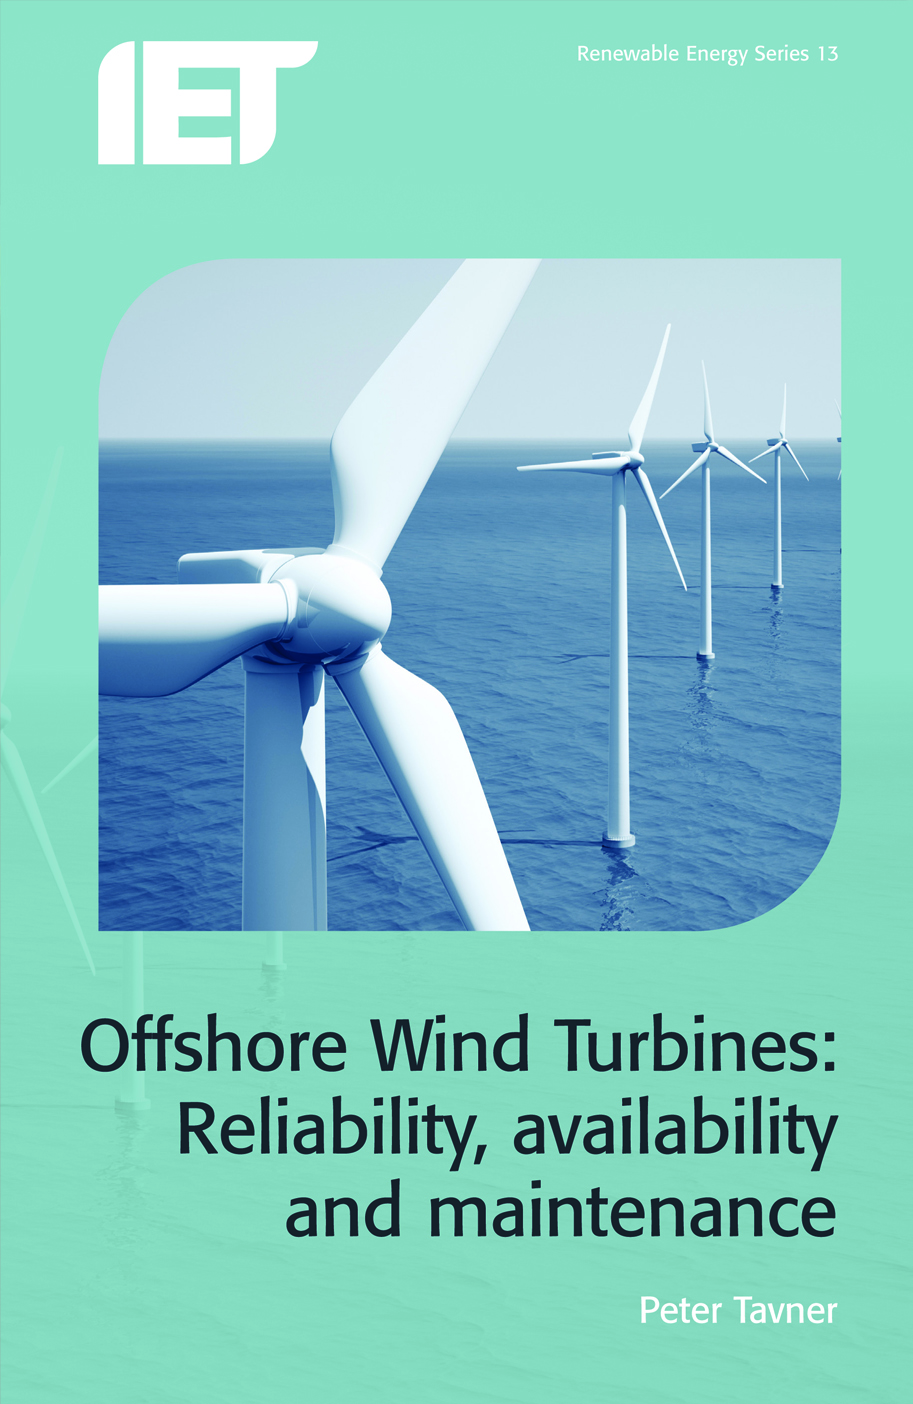 Offshore Wind Turbines, Reliability, availability and maintenance